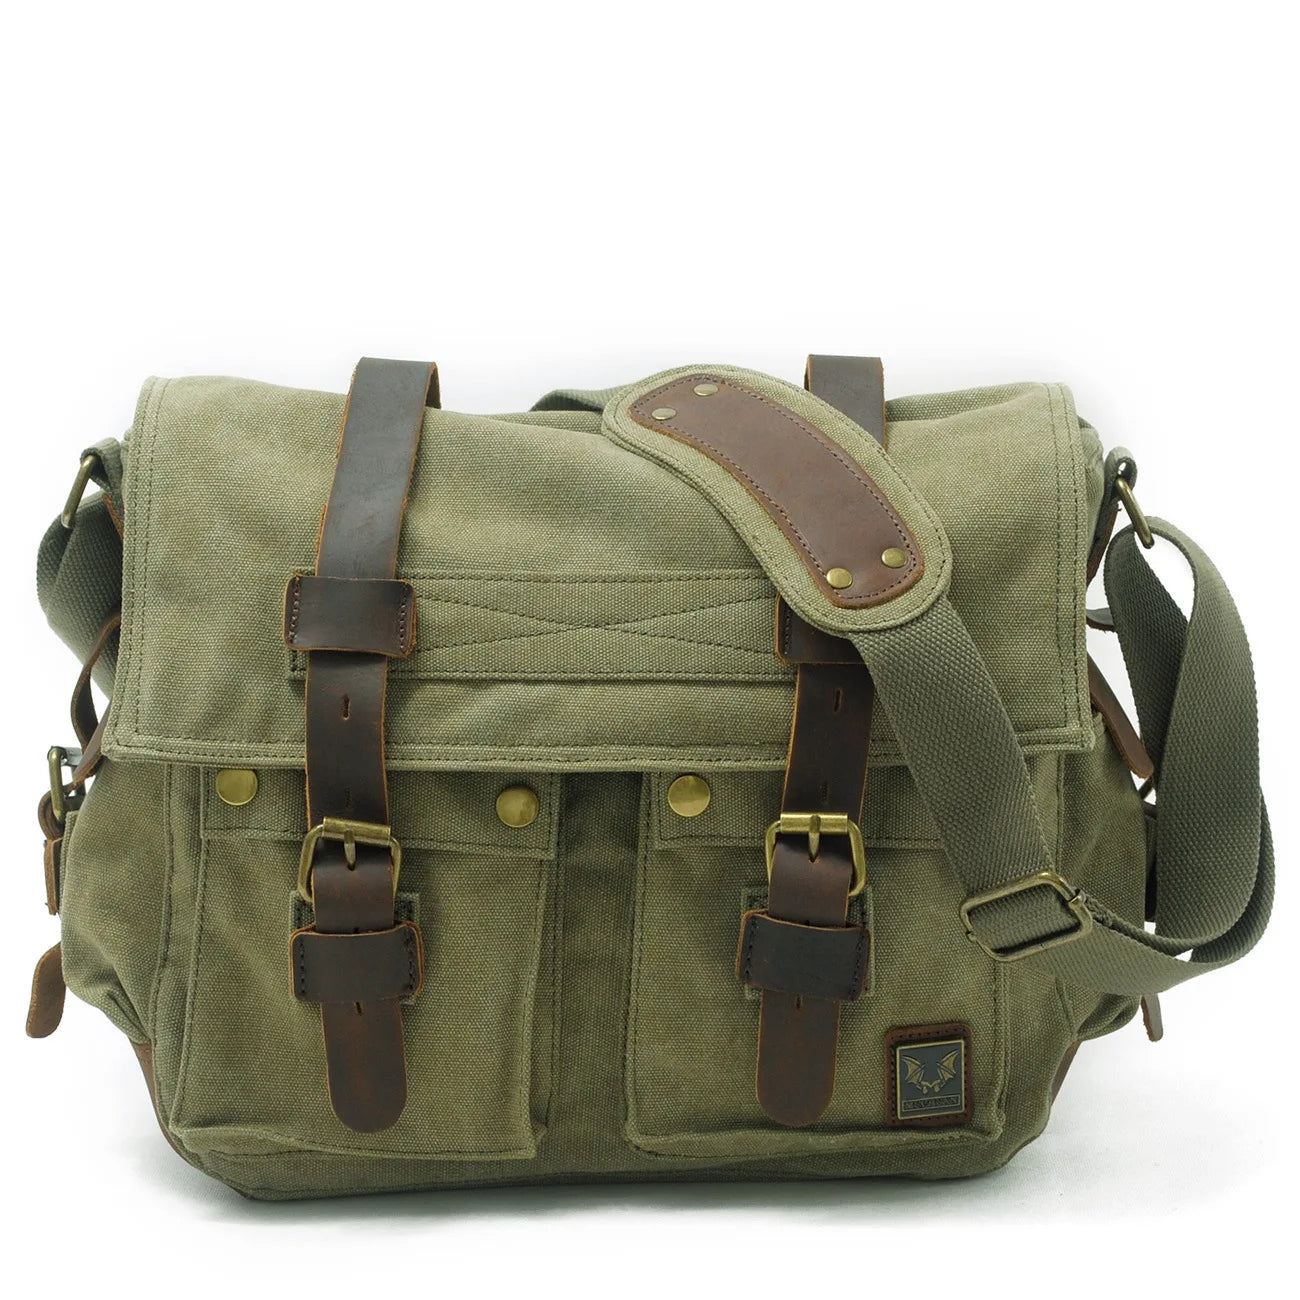 Men's Tablet Shoulder Bag The Store Bags Army green 